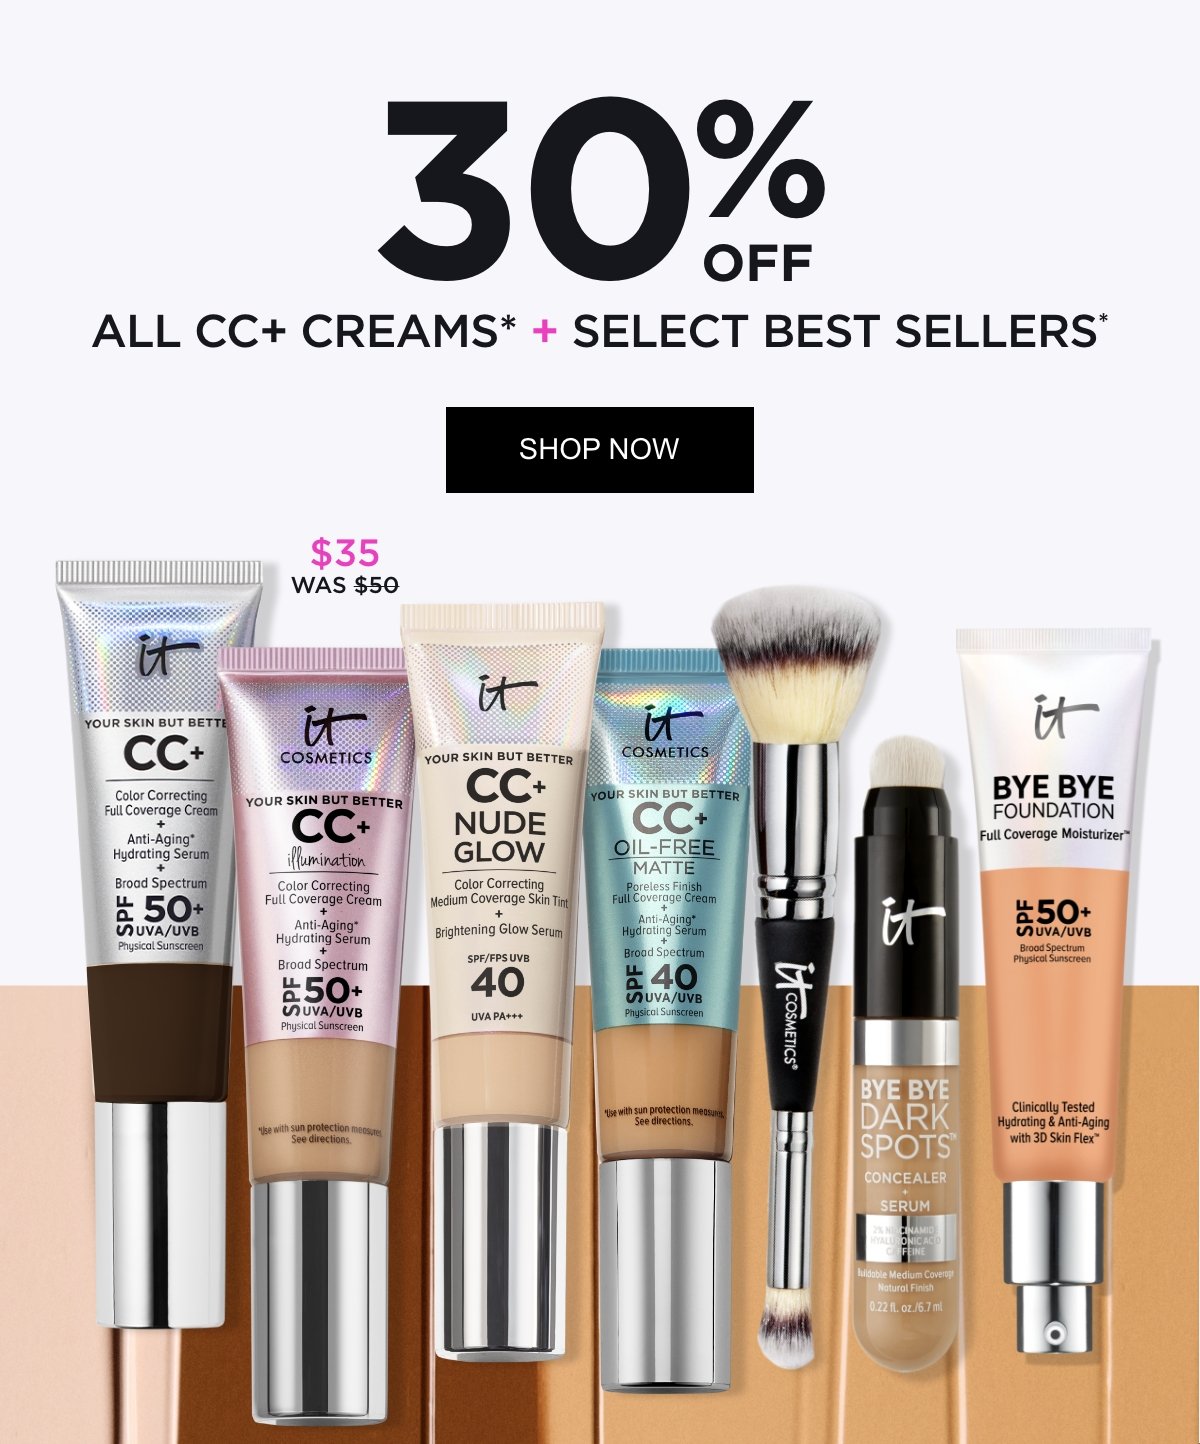 30% OFF All CC+ Creams* + Select Best Sellers*